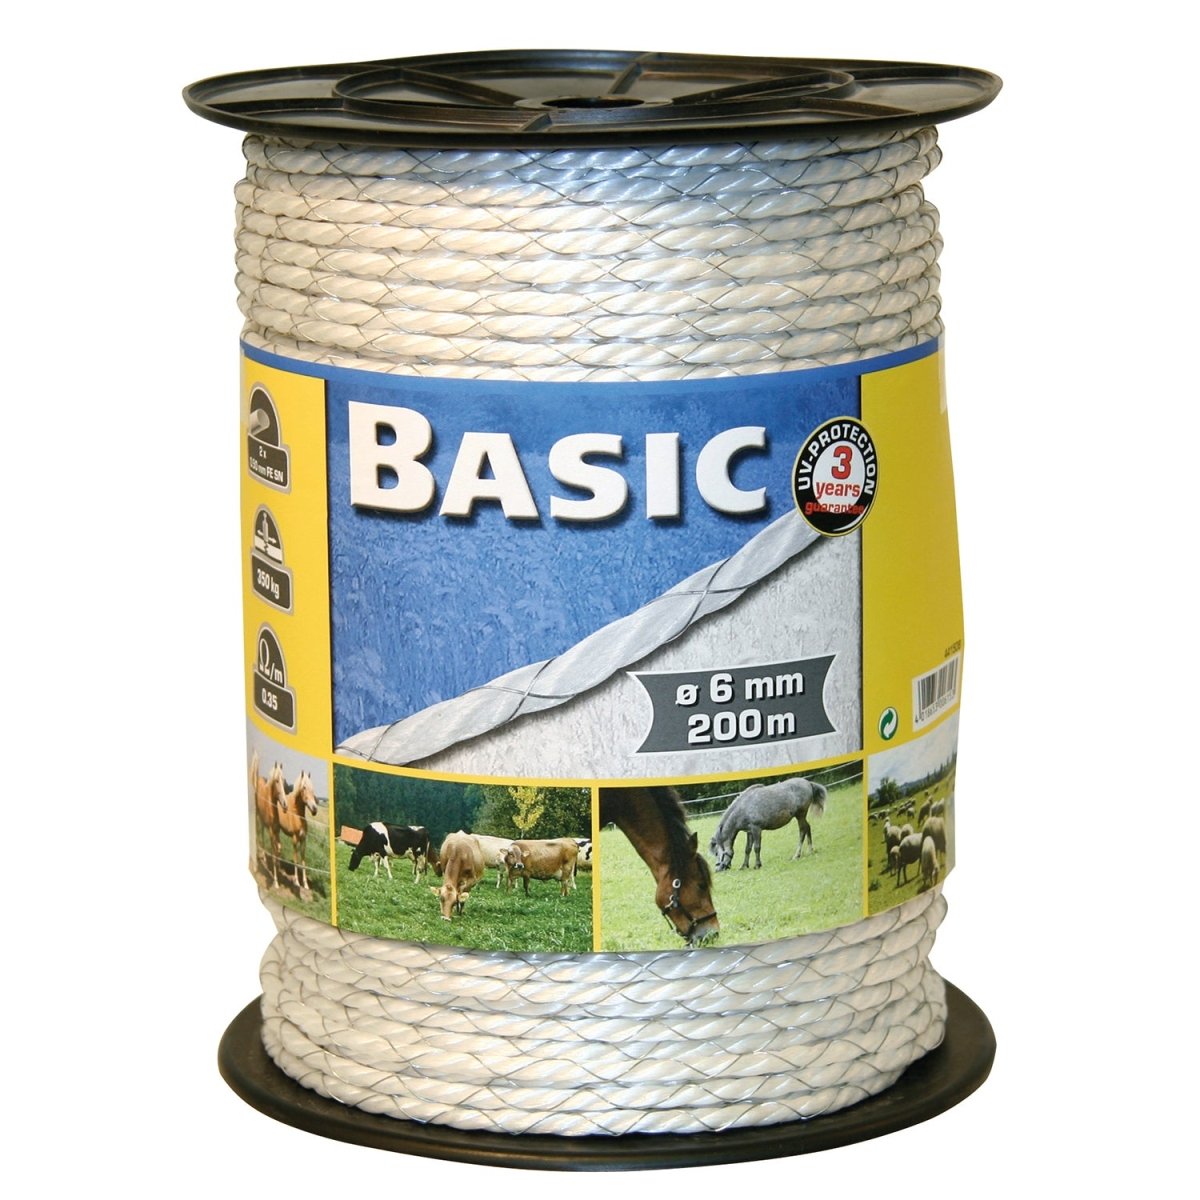 Corral Basic-Fencing Rope C/W Tinned Iron Wires 200M - 200M -